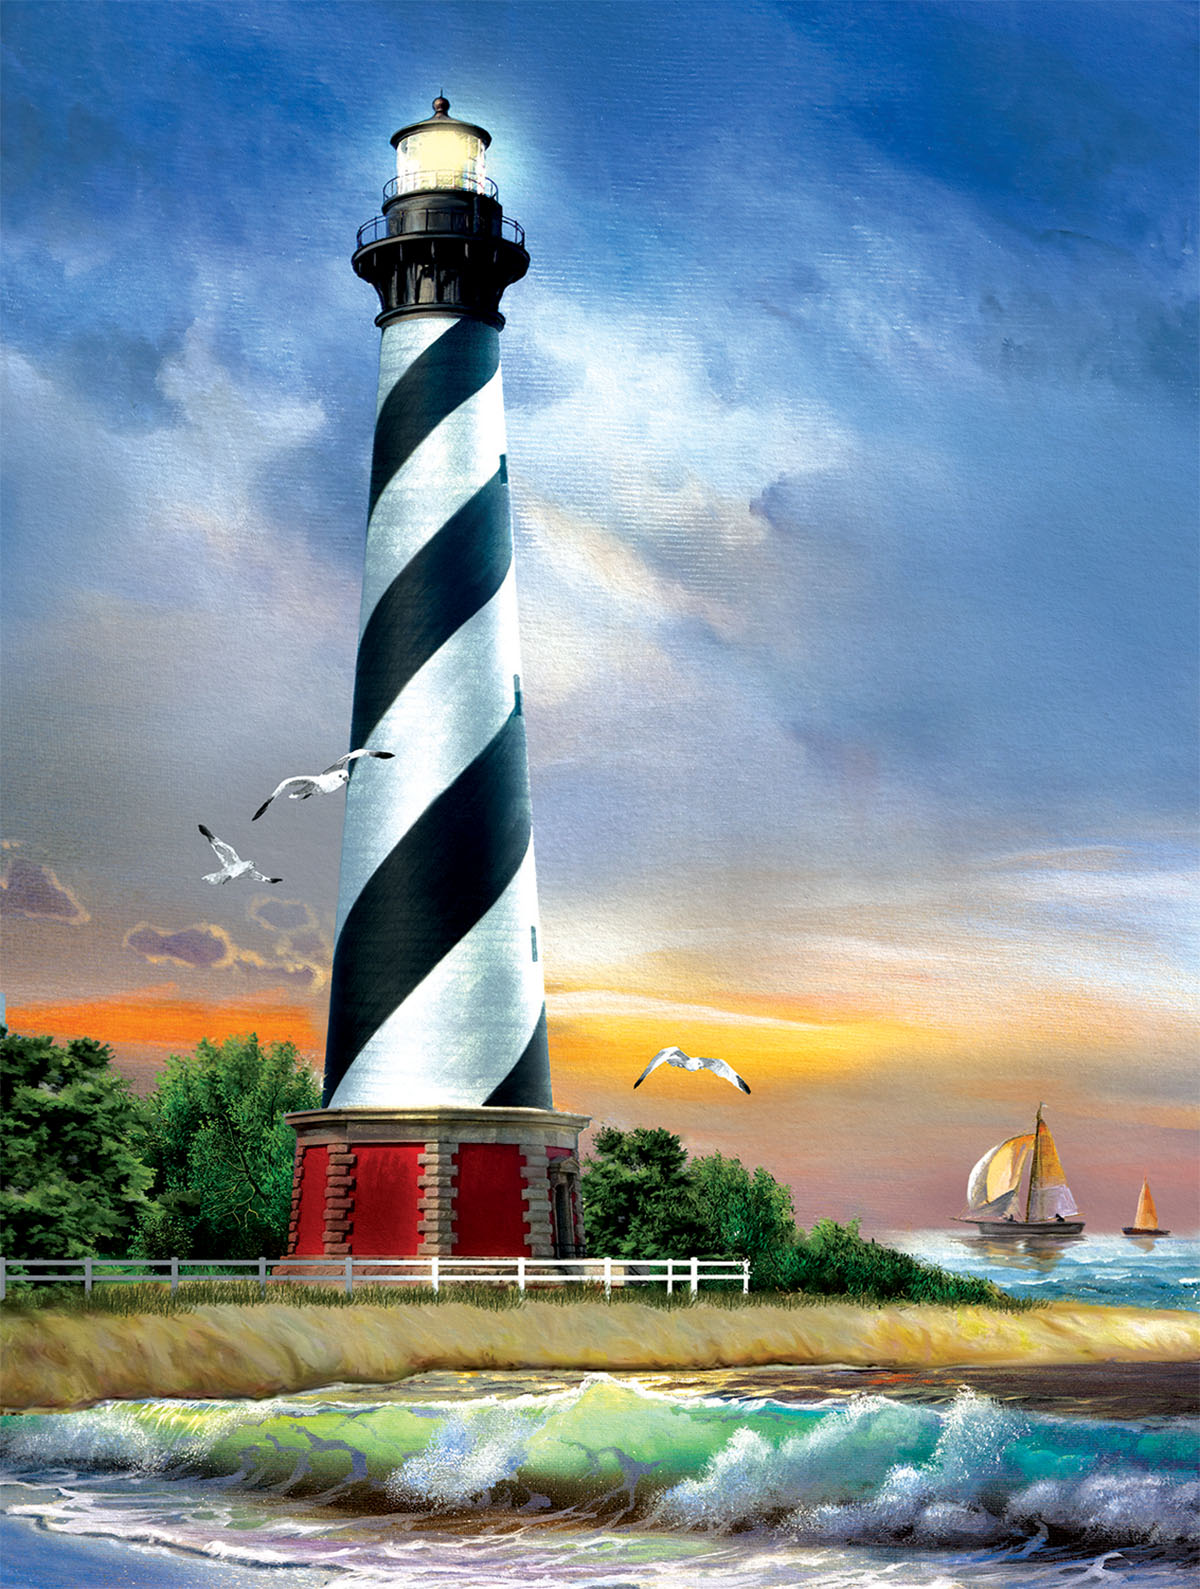 Cape Hatteras Lighthouse - Scratch and Dent Lighthouse Jigsaw Puzzle